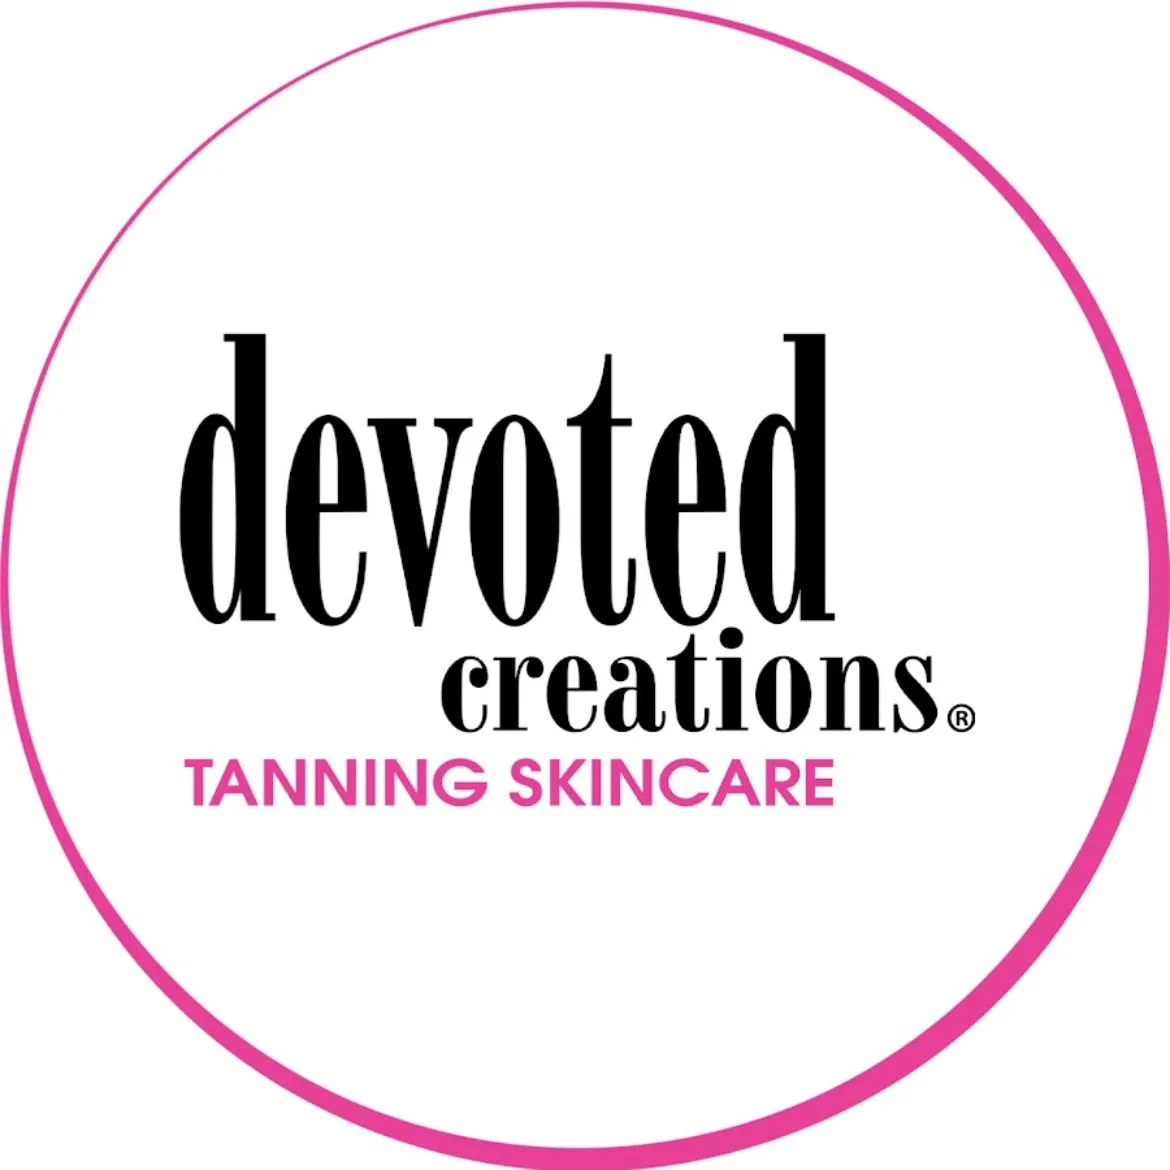 Devoted Creations Tanning Lotion